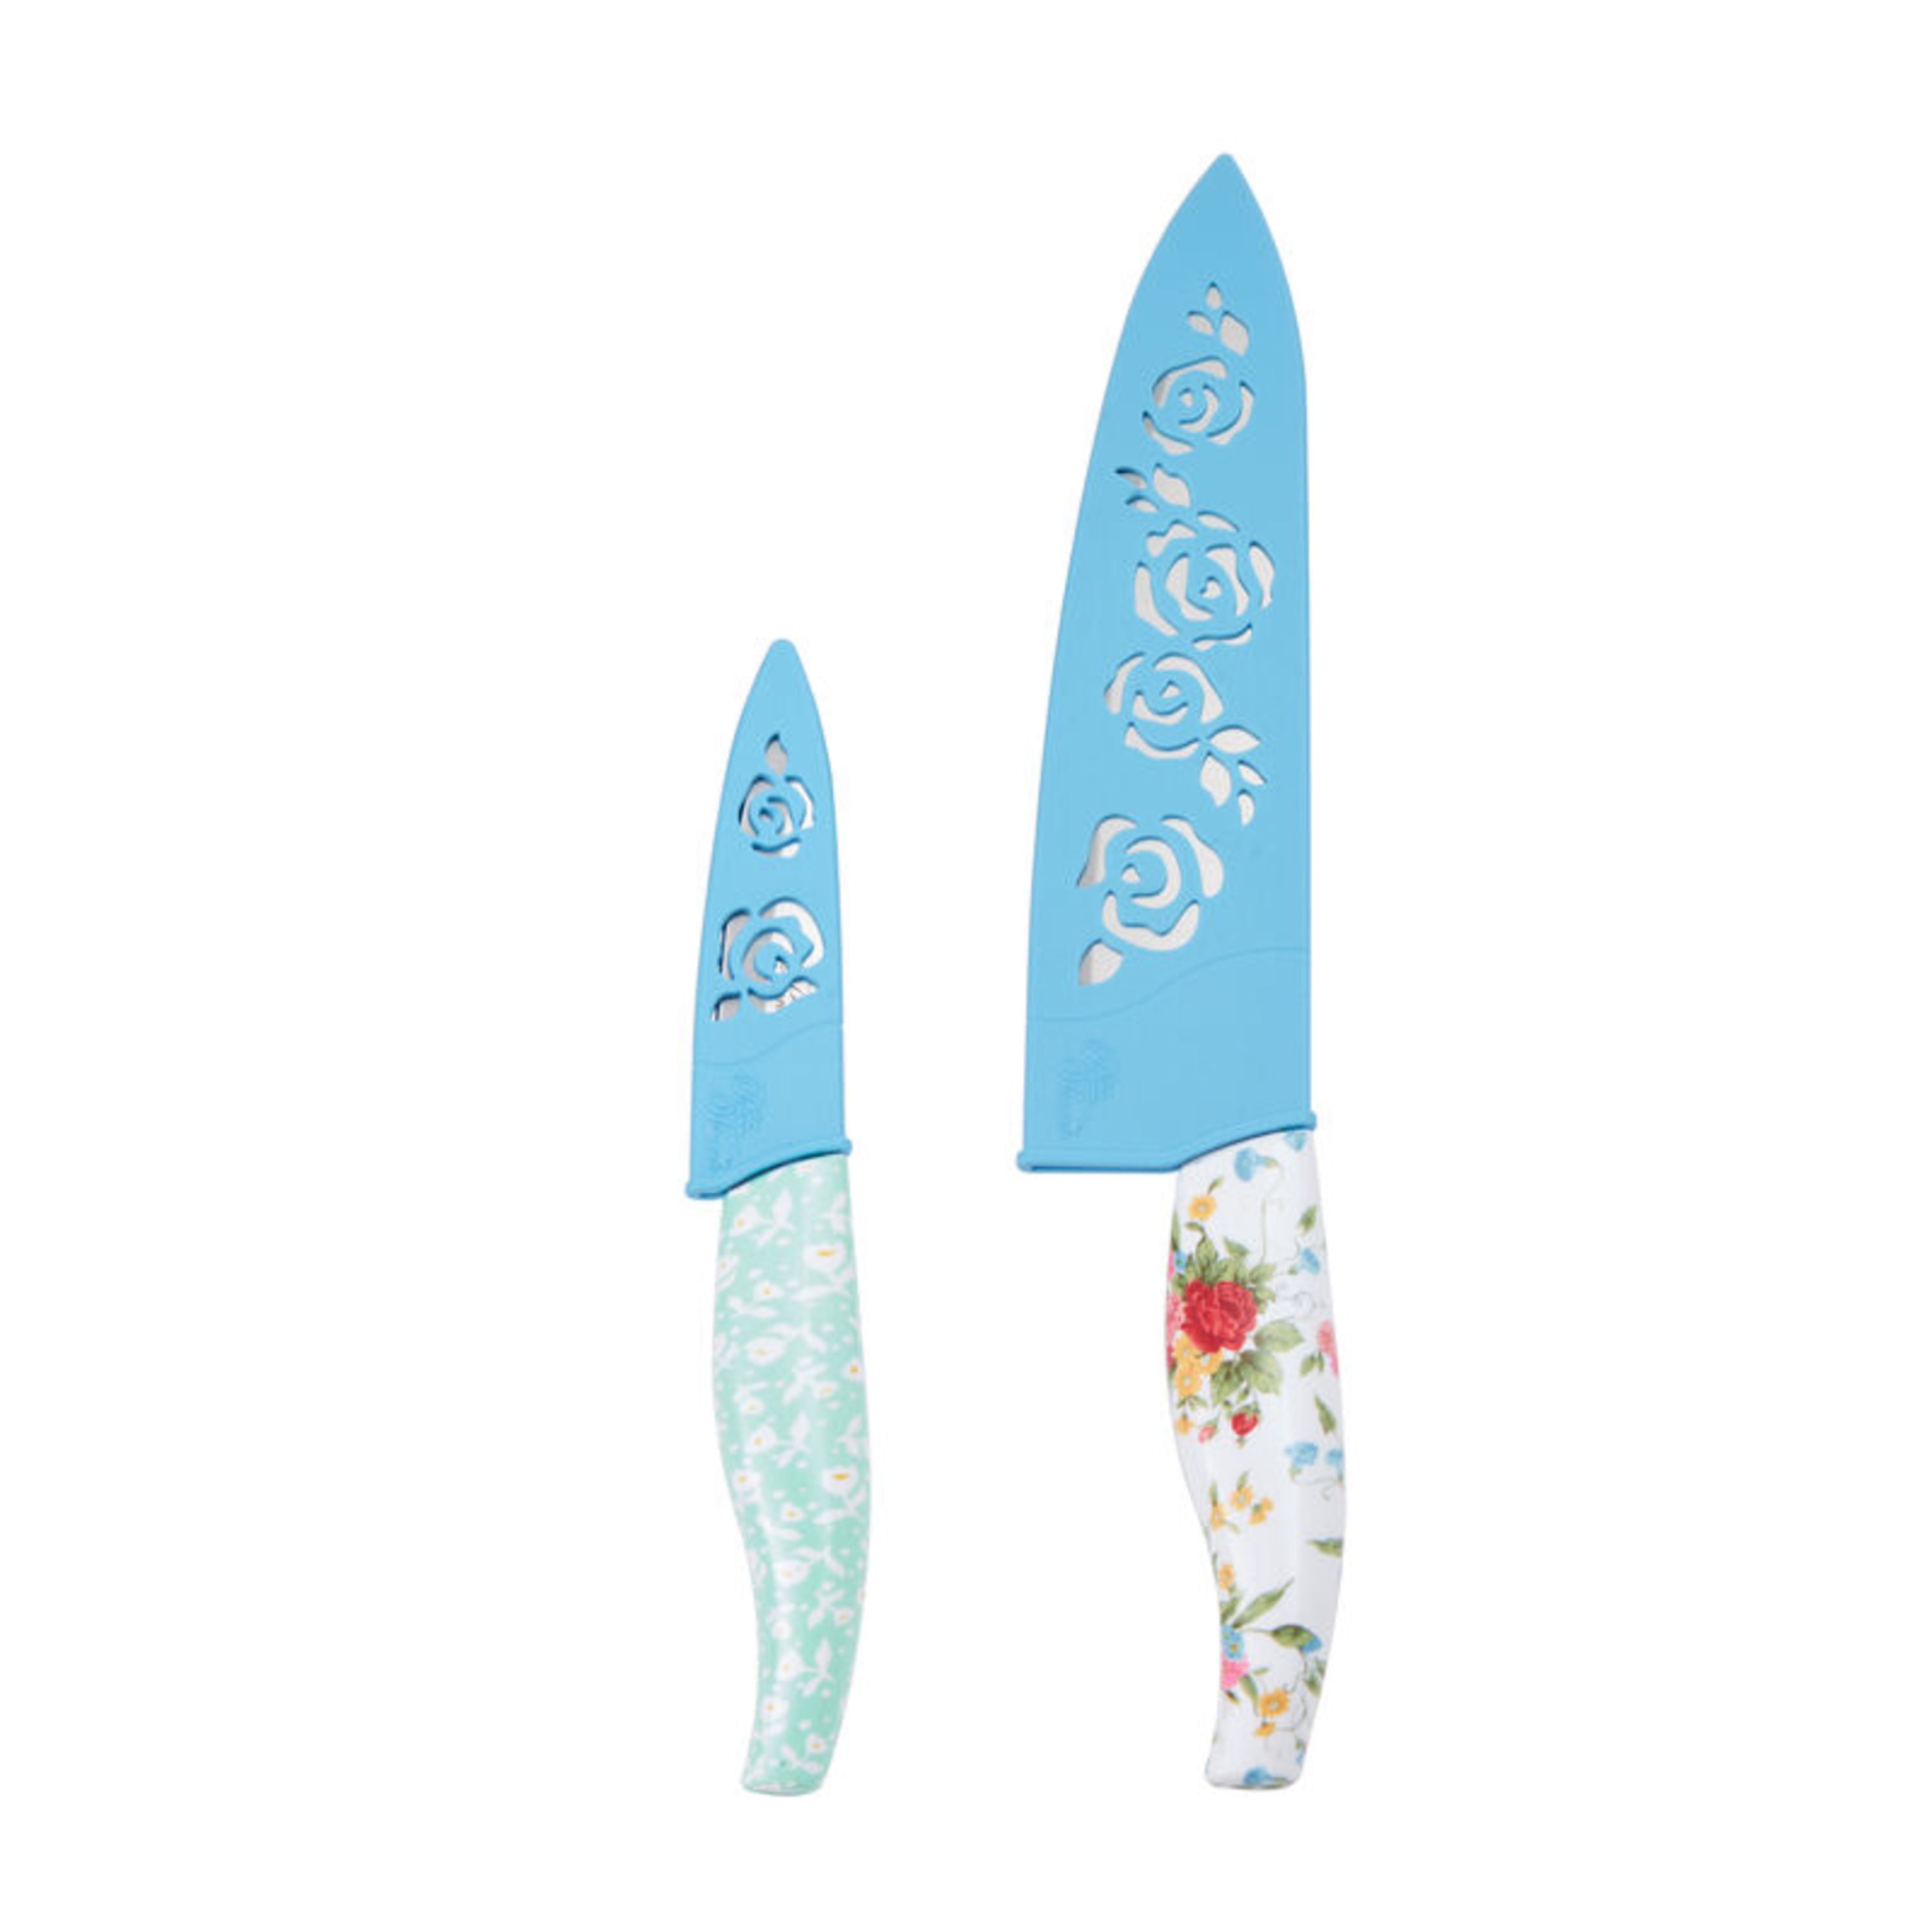 The Pioneer Woman 2-Piece Chef Knife and Parer Set, Sweet Rose